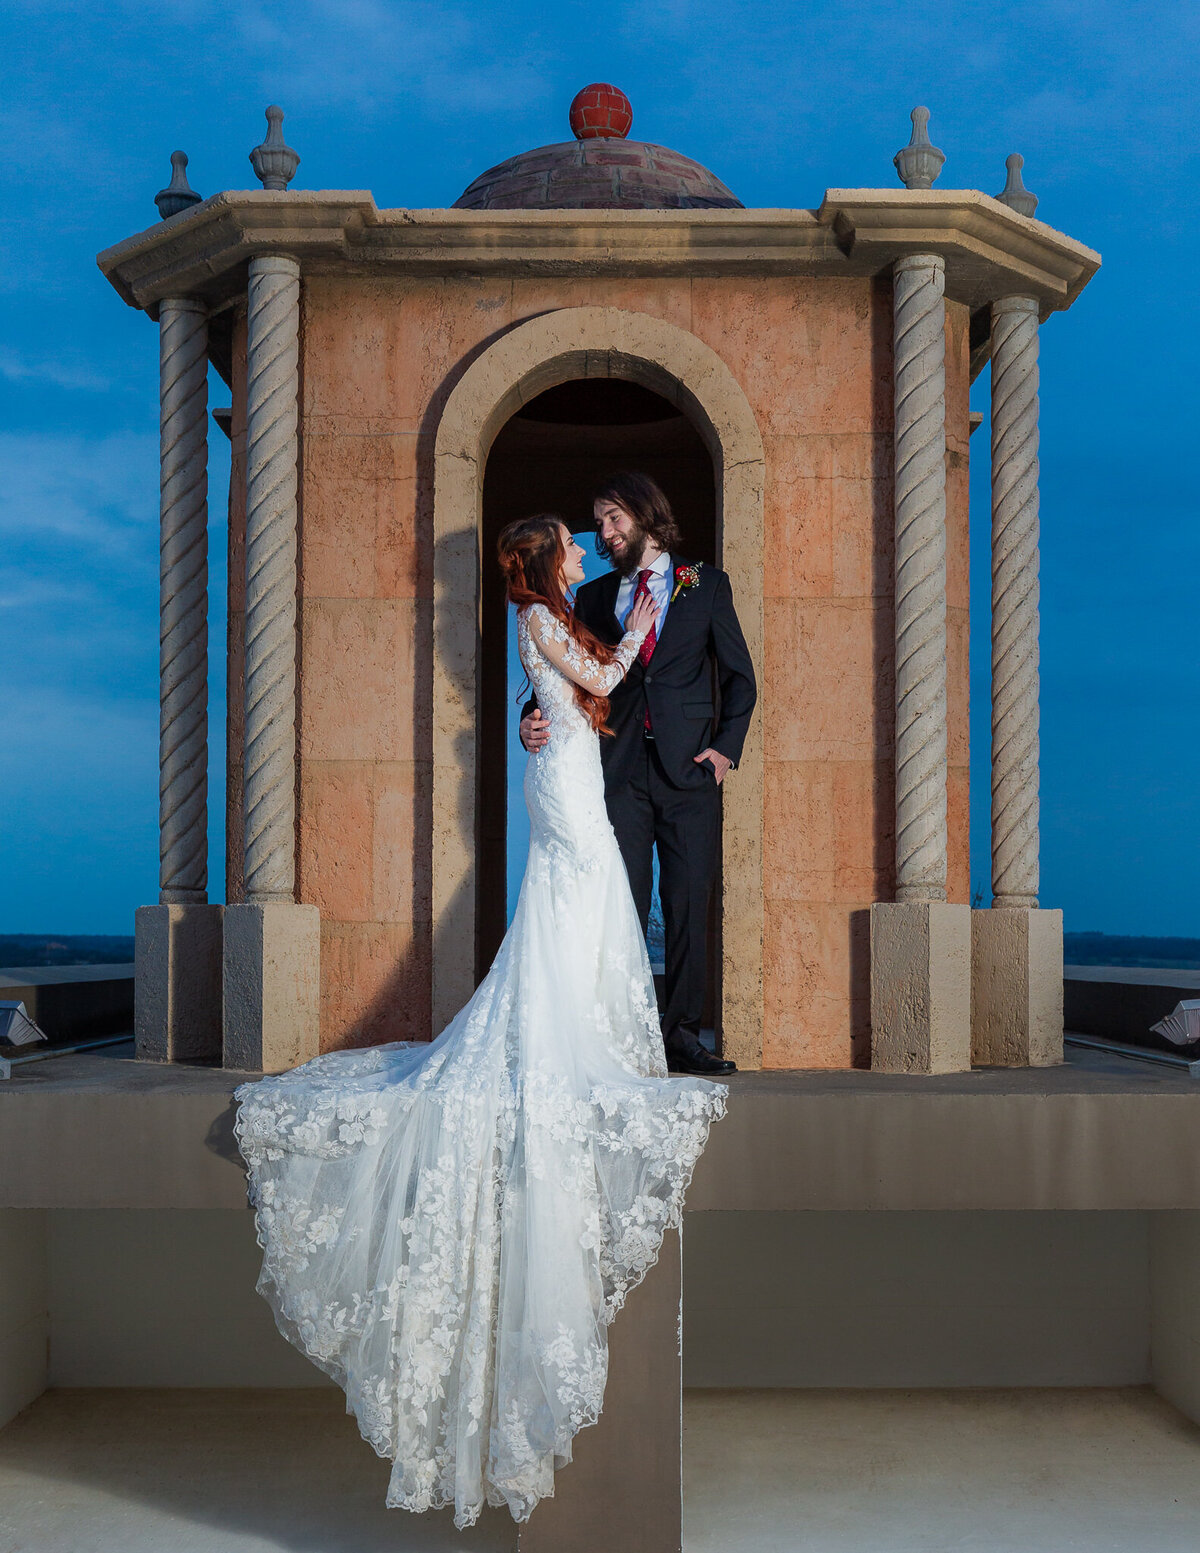 Dallas Wedding Photographer at night with bride and groom on rooftop